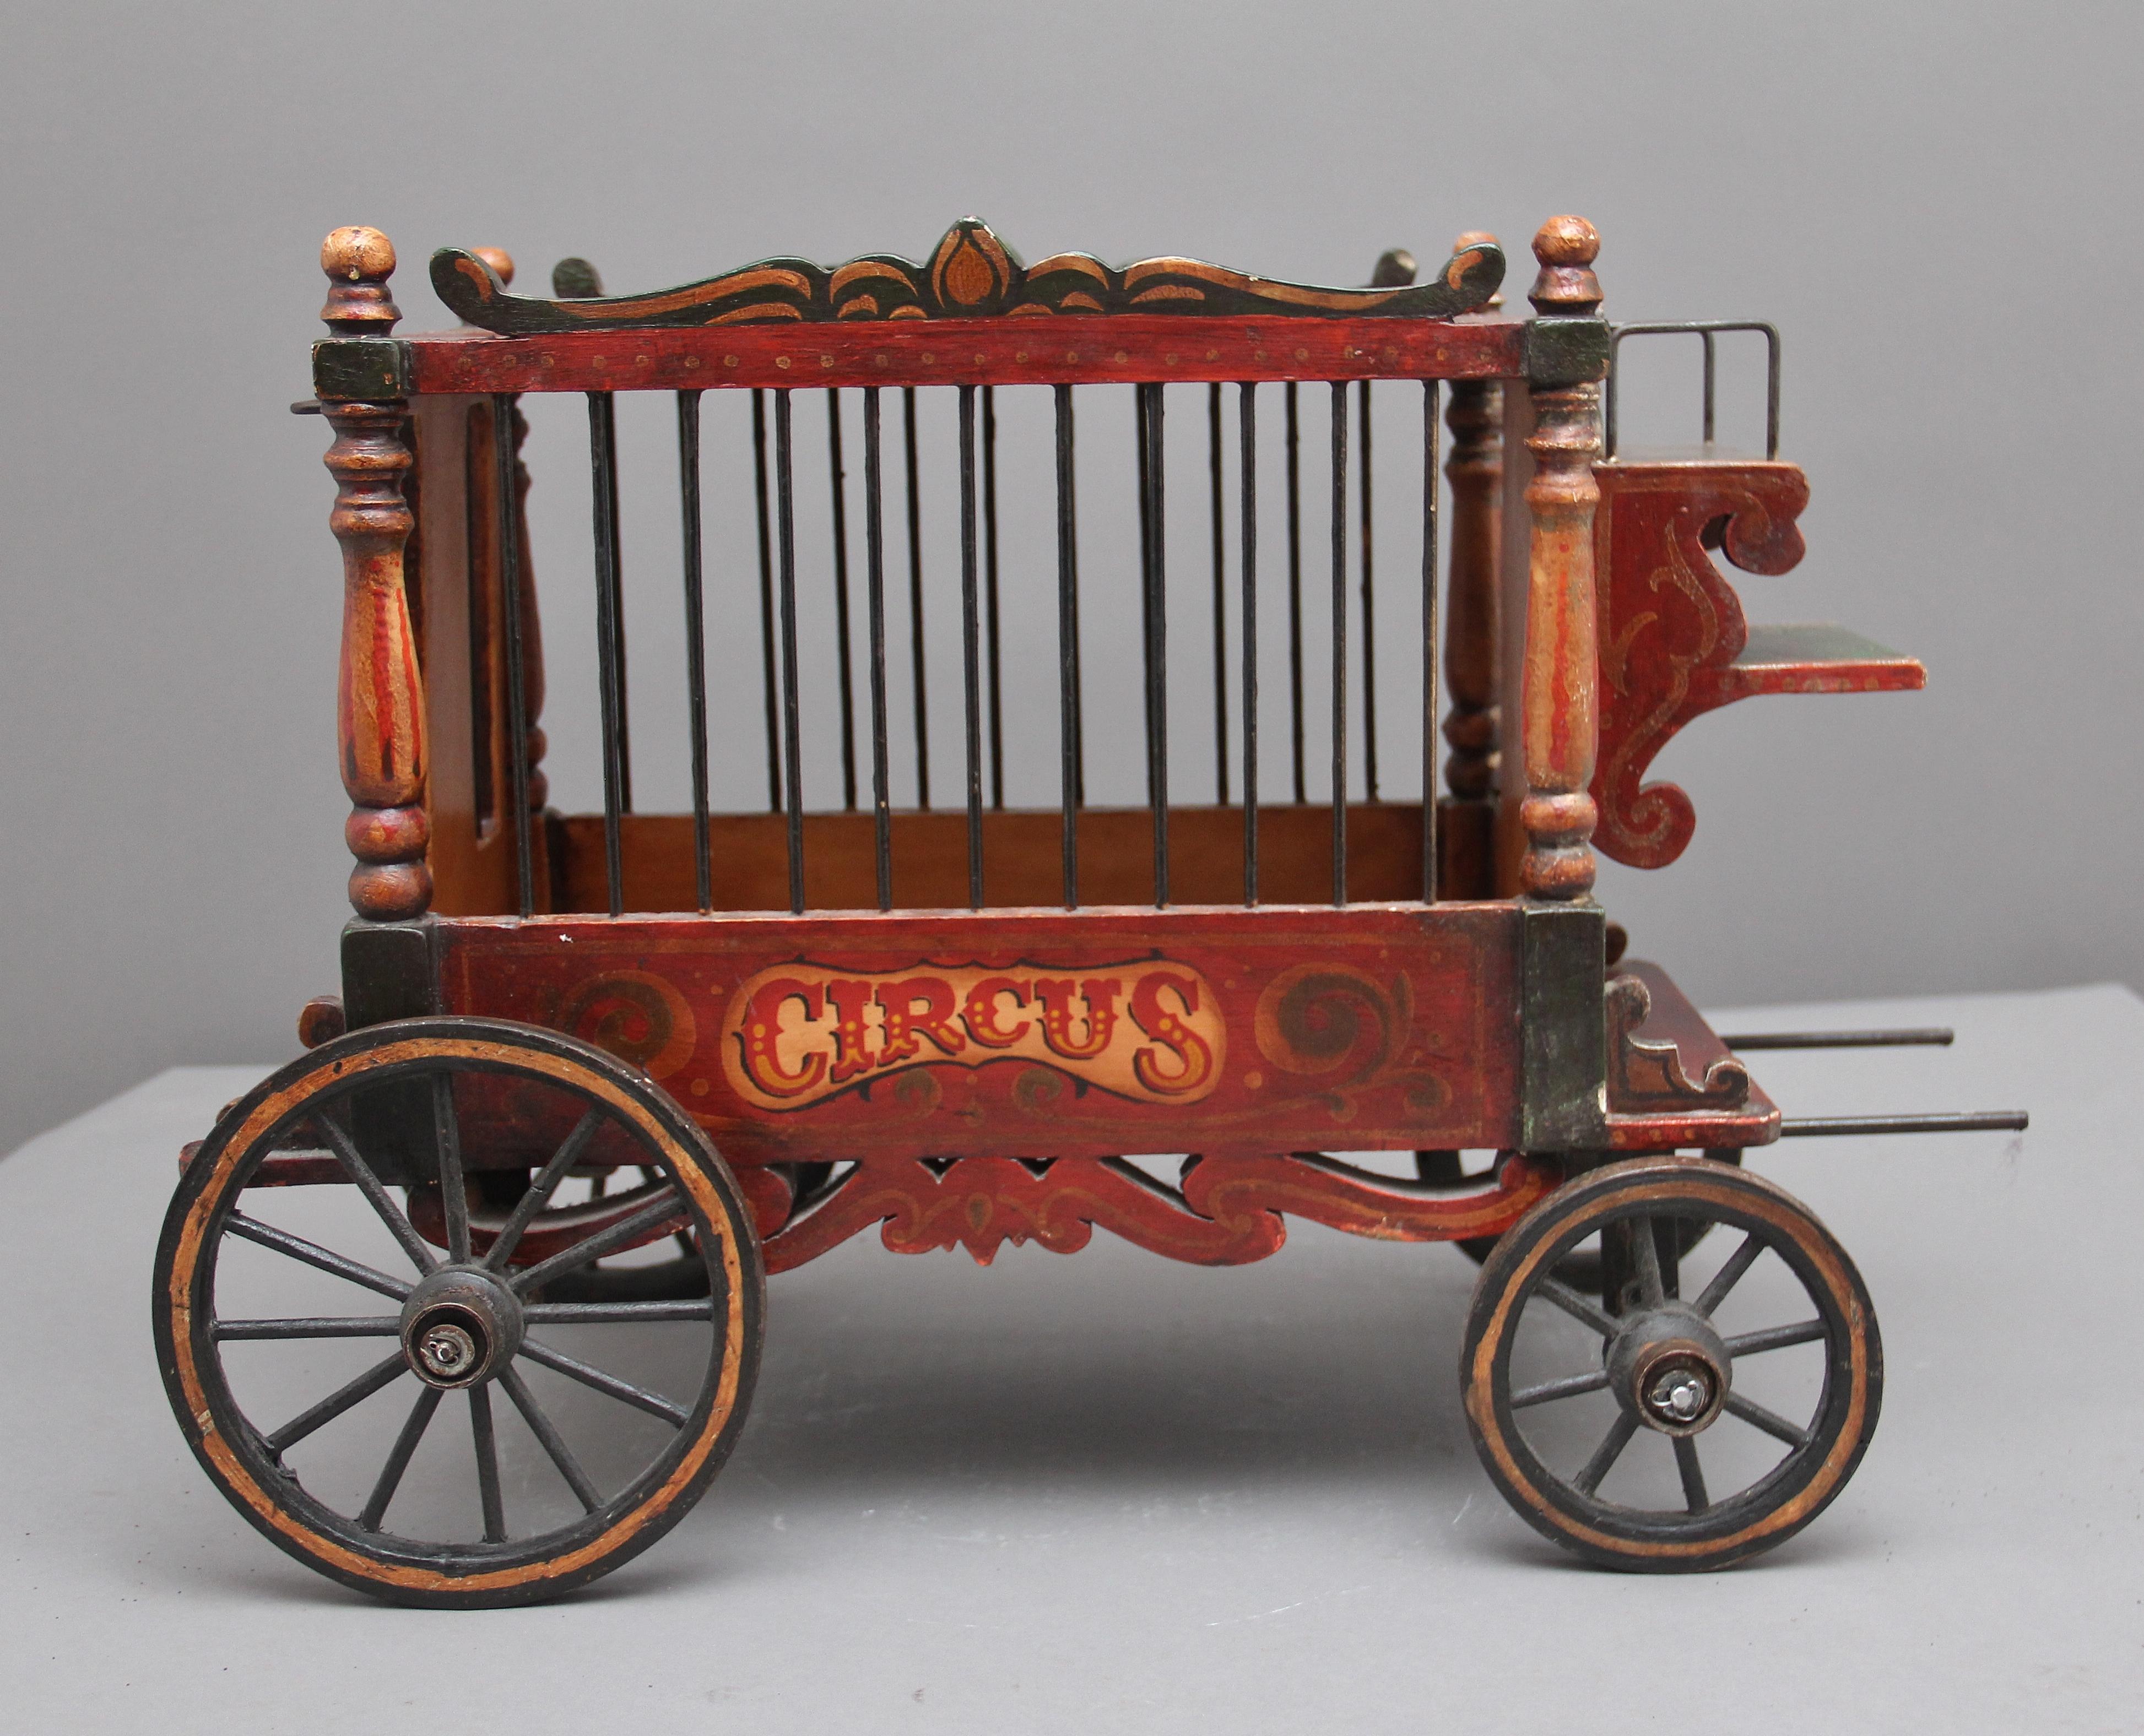 Early 20th century model of a circus wagon, the model itself is in the typical style of a circus wagon of that period with smaller wheels at the front and larger ones at the back, bars on all sides and the back section dropping down so the various